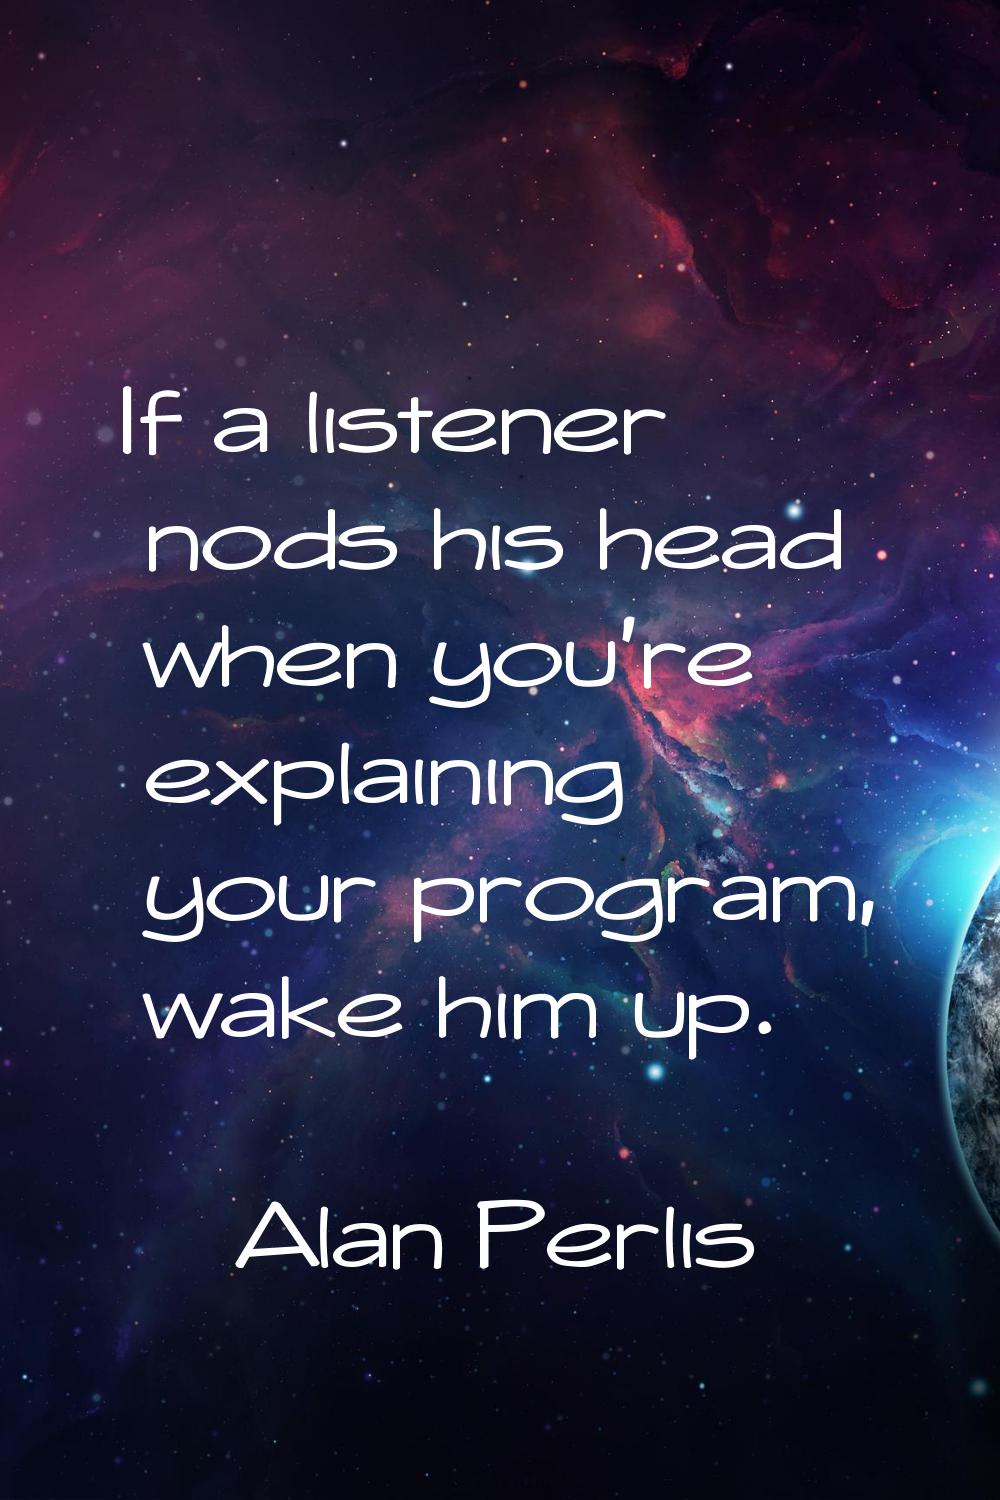 If a listener nods his head when you're explaining your program, wake him up.